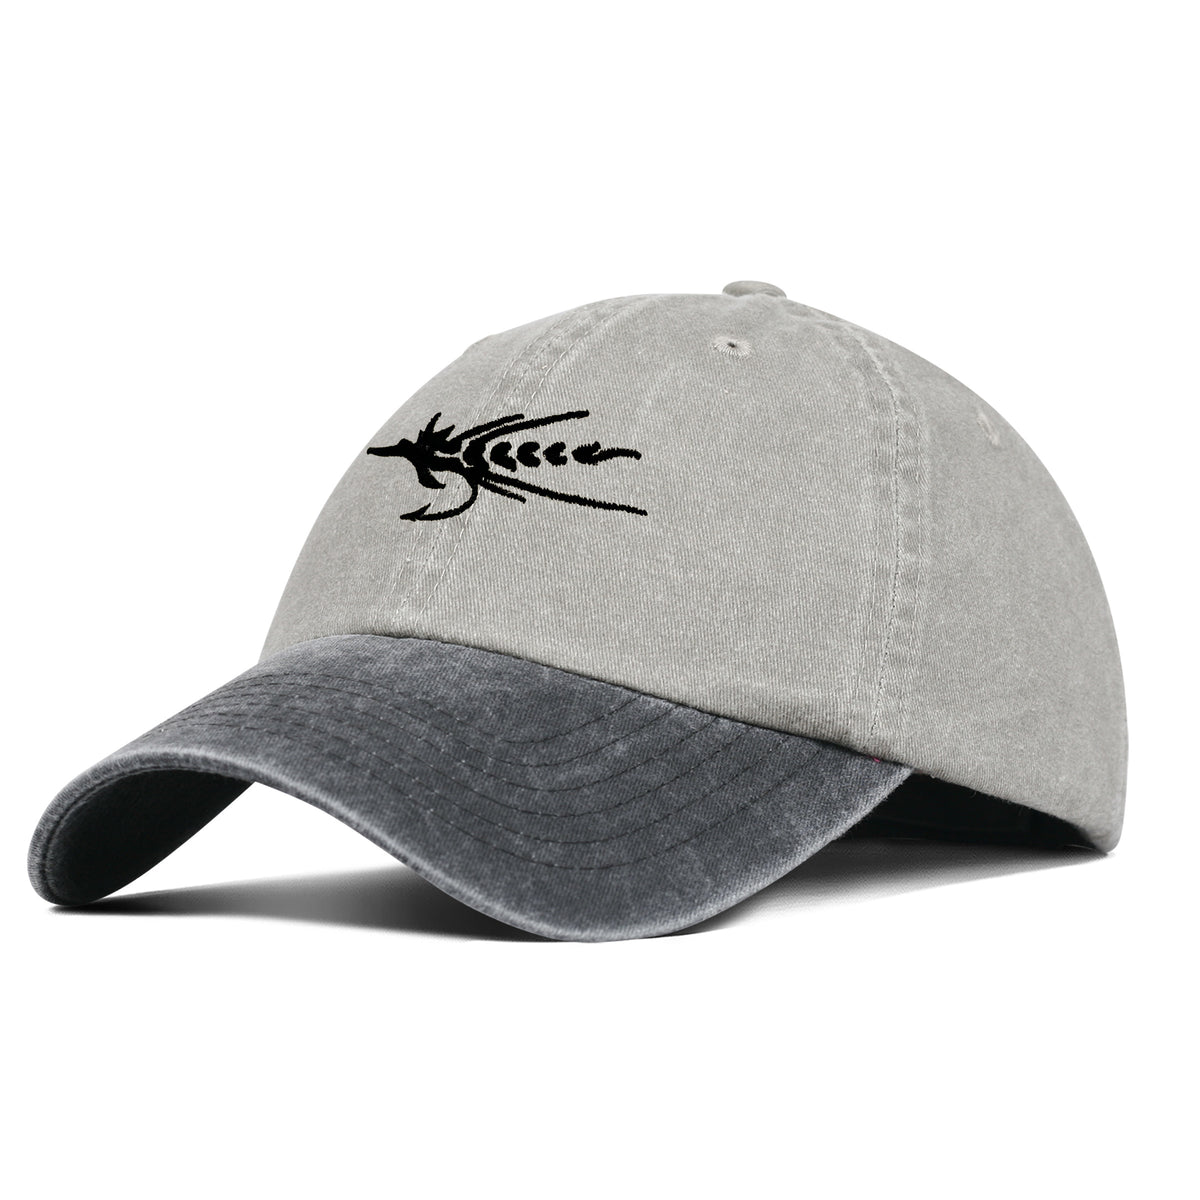 Black Fly Embroidered Hat - Khaki/Charcoal